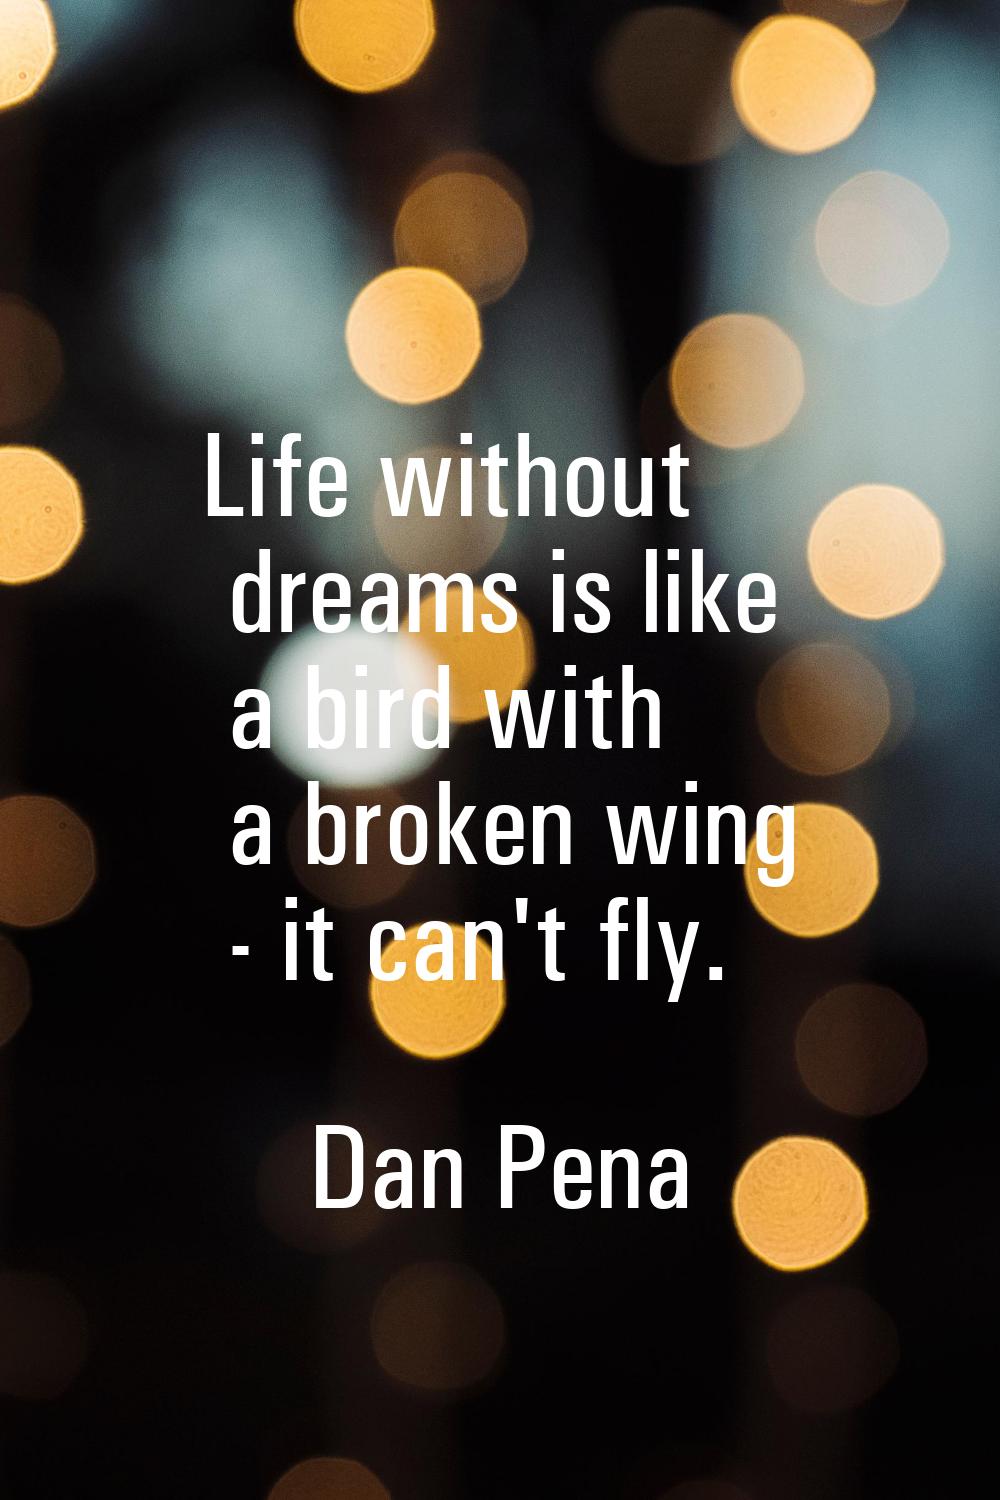 Life without dreams is like a bird with a broken wing - it can't fly.